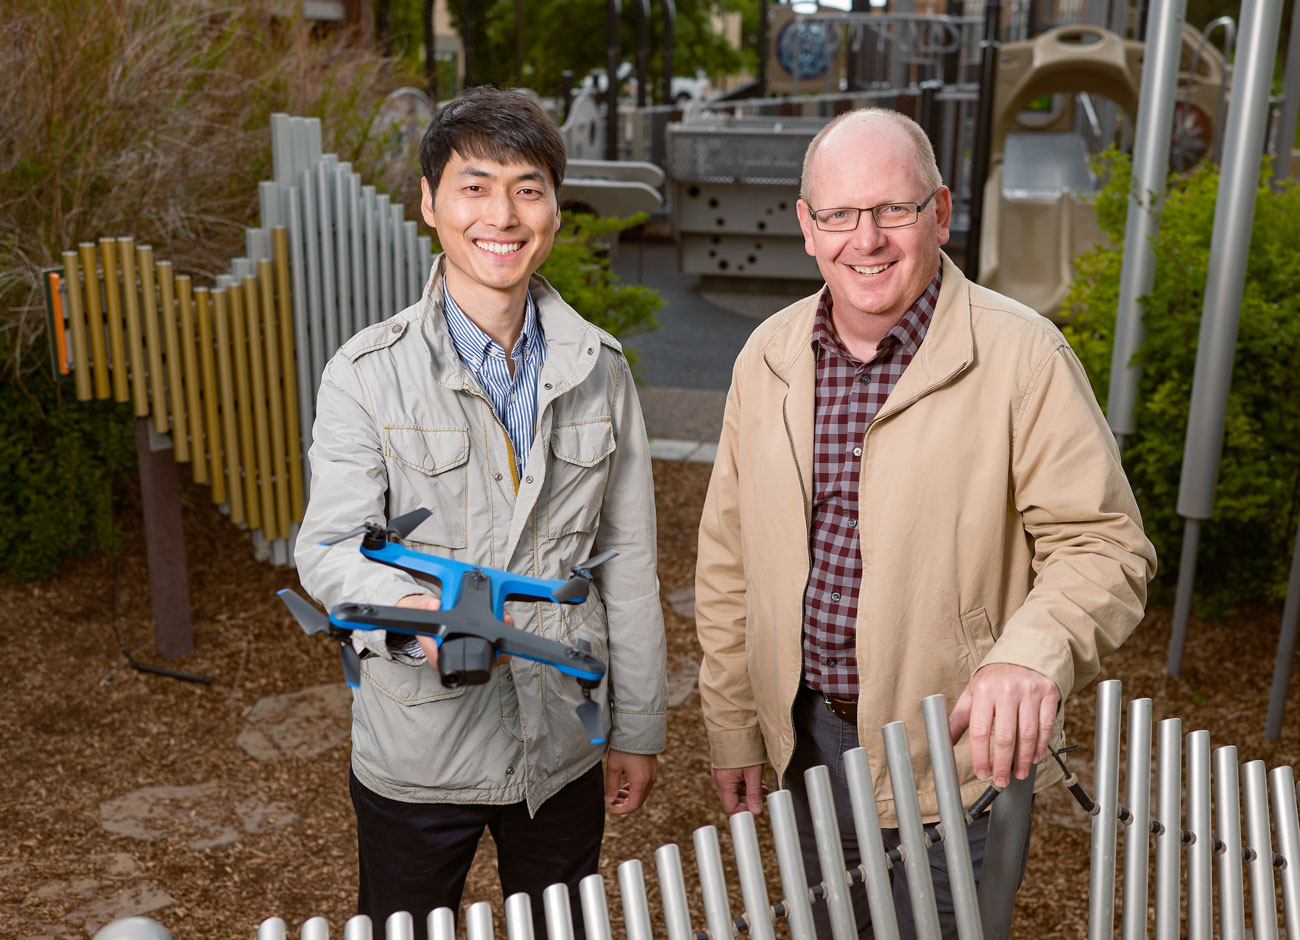 two professors stand in a playground, one holds a drone. Both are smiling. In the background are climbing structures, slides, and musical structures children activate through play.